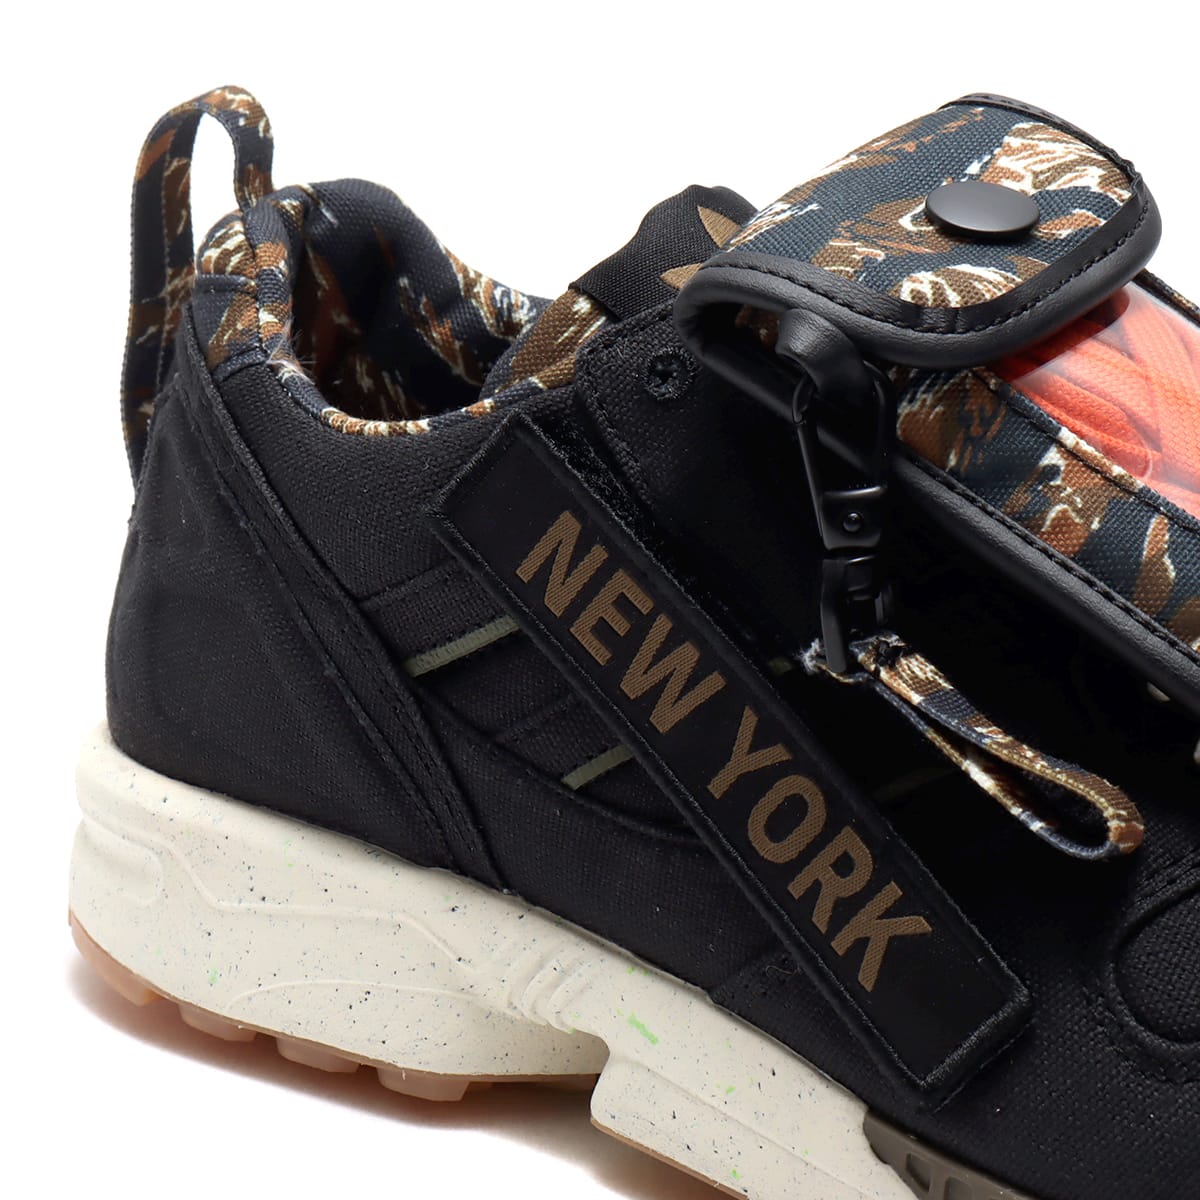 adidas ZX 8000 OUT THERE CORE BLACK/COLLEGIATE ORANGE/GUM 2 21SS-I